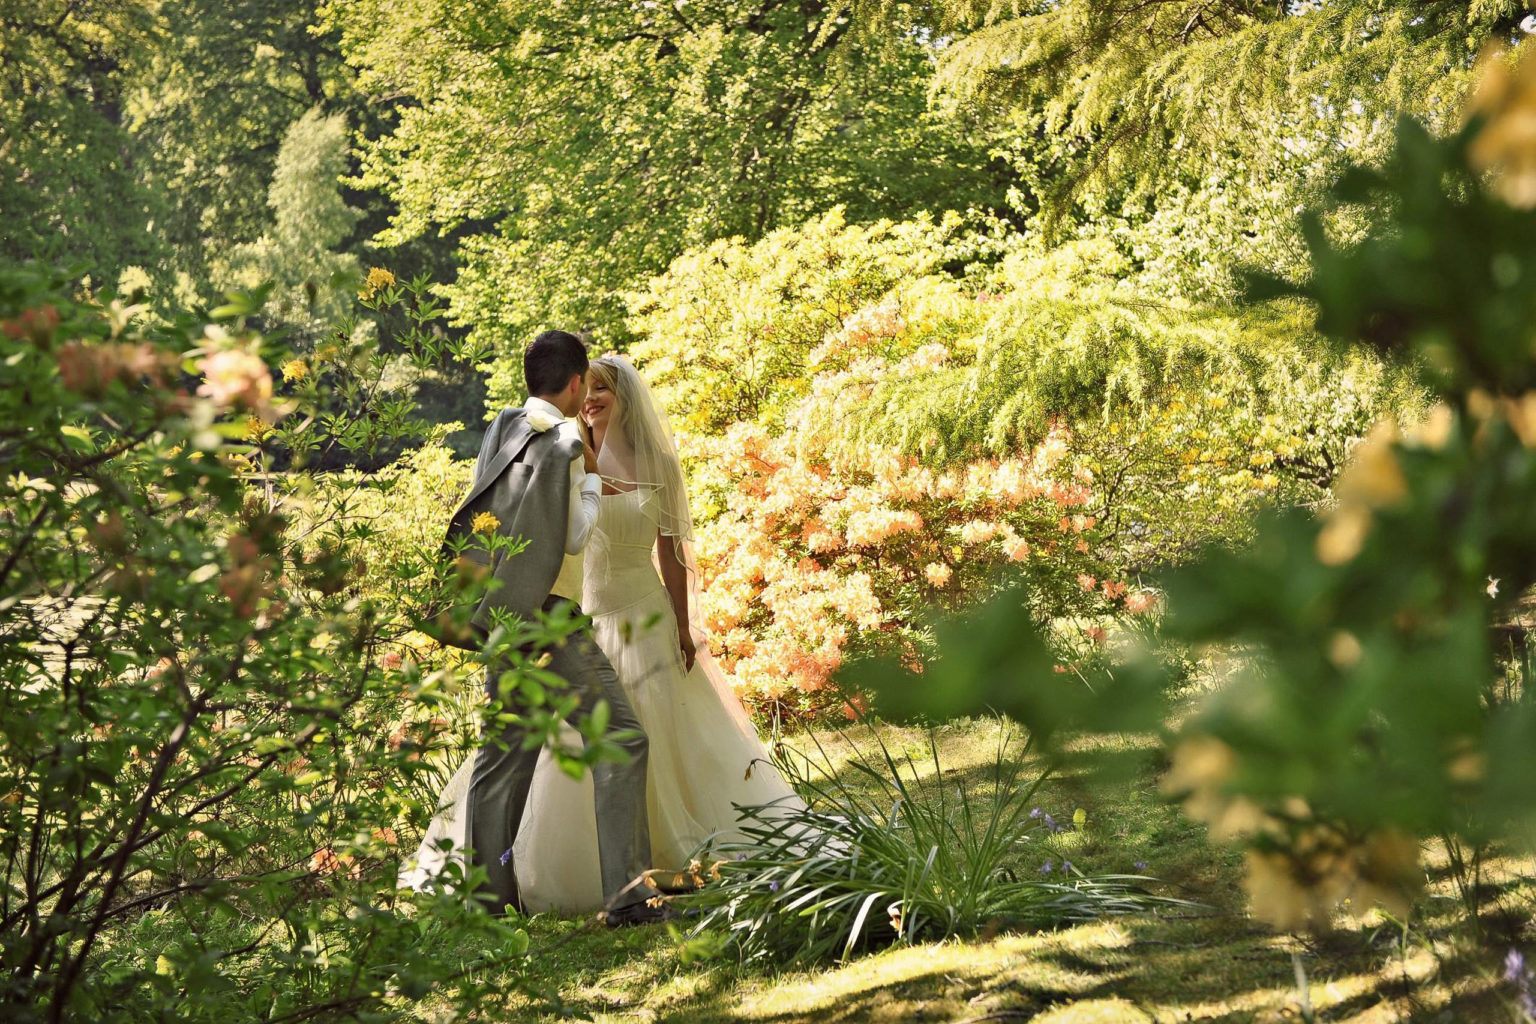 A bride and groom standing among trees in Swinton Estate parkland gardens after a hotel wedding near Harrogate